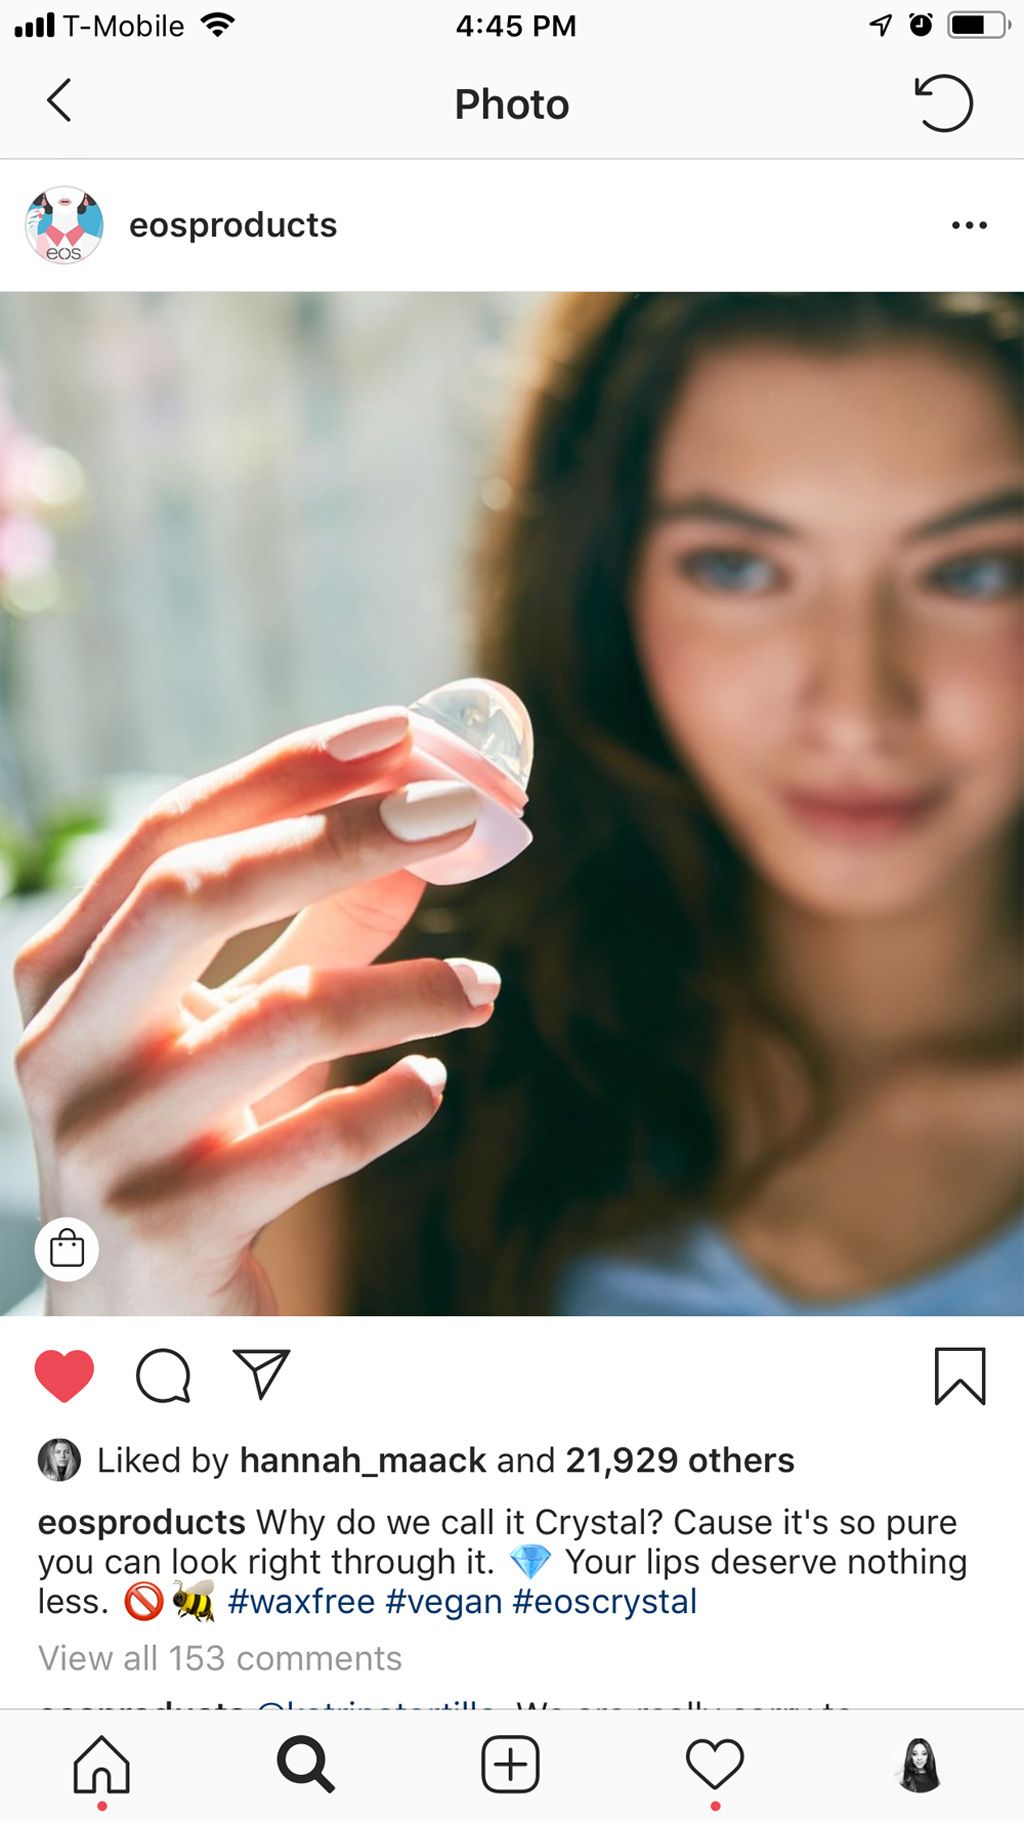 Screenshot of Instagram post for eosproducts showing their Crystal lip balm